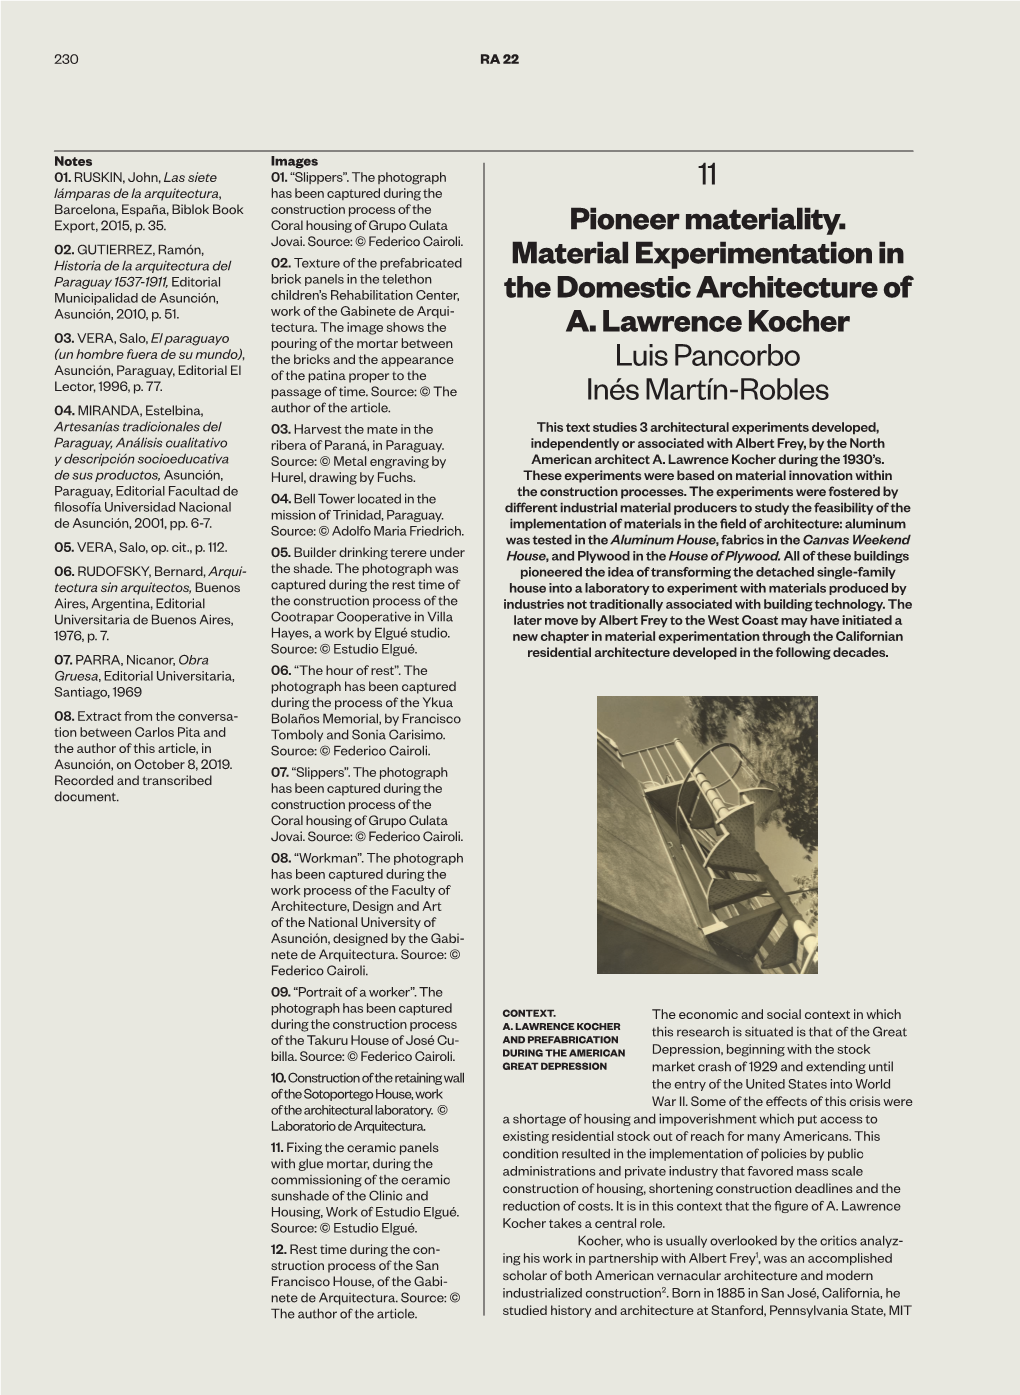 11 Pioneer Materiality. Material Experimentation in the Domestic Architecture of A. Lawrence Kocher Luis Pancorbo Inés Martín